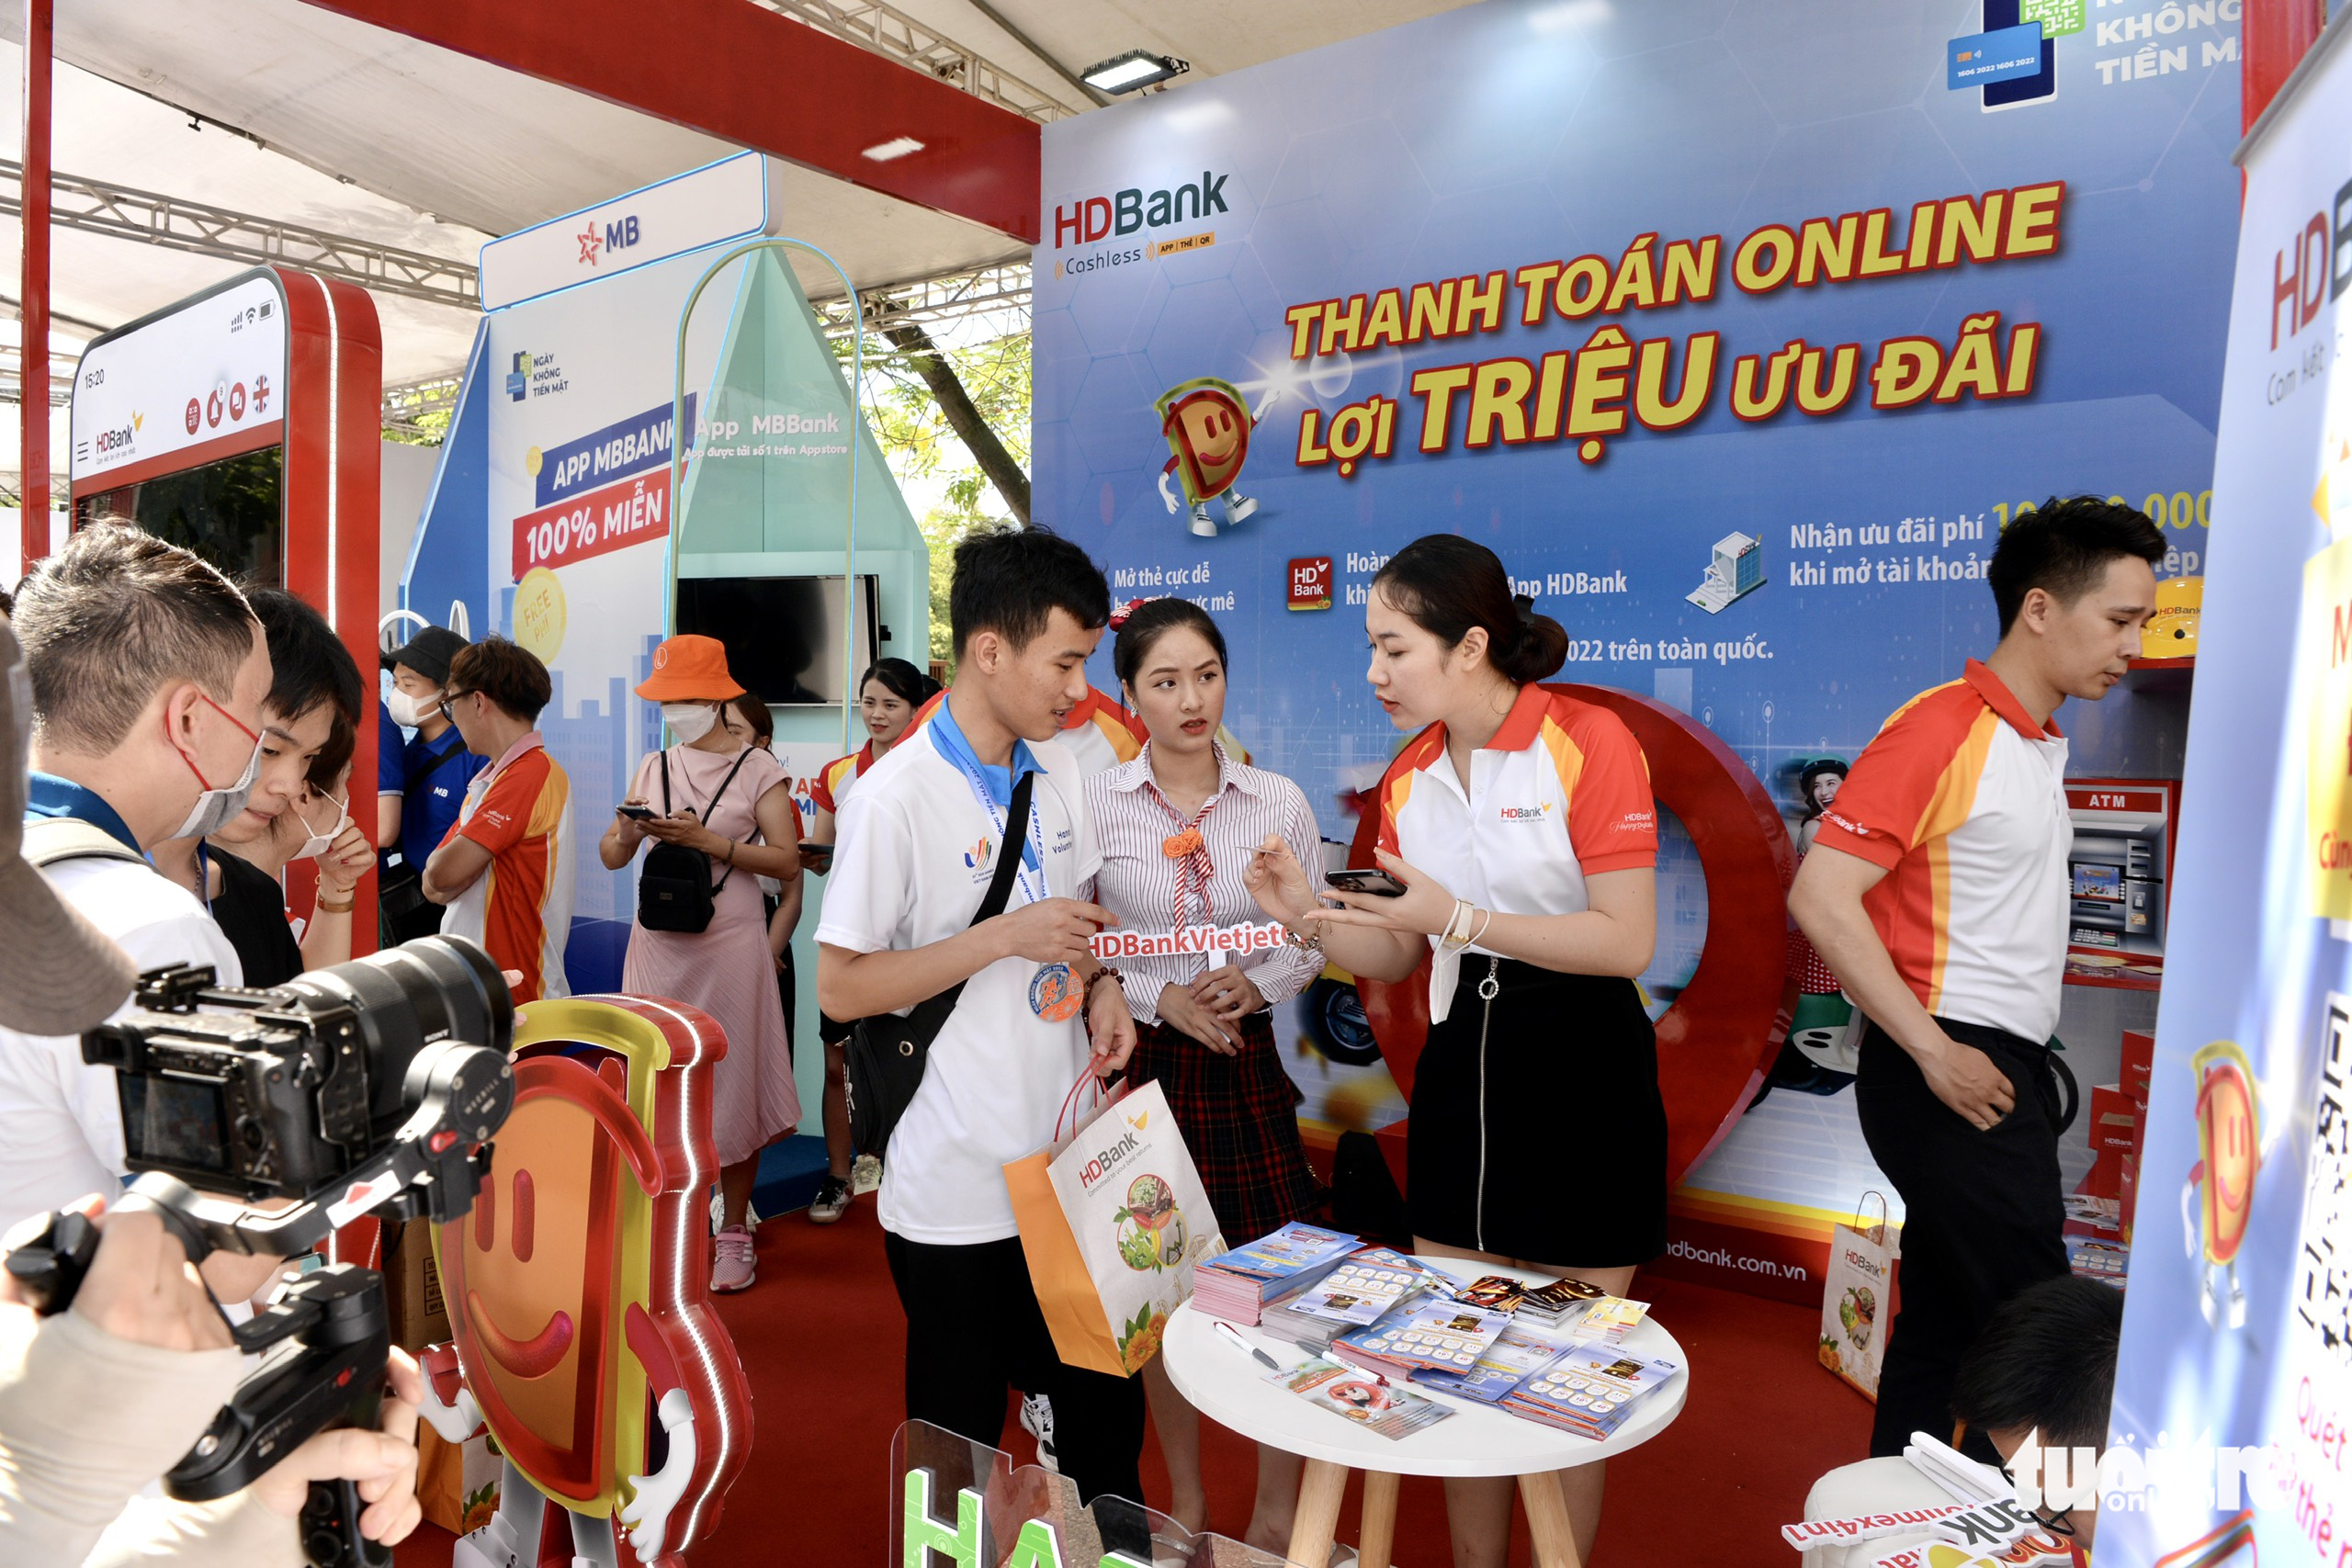 The stall of HD Bank at the launching ceremony of the Cashless Ride in Hanoi, June 19, 2022. Photo: T.T.D. / Tuoi Tre